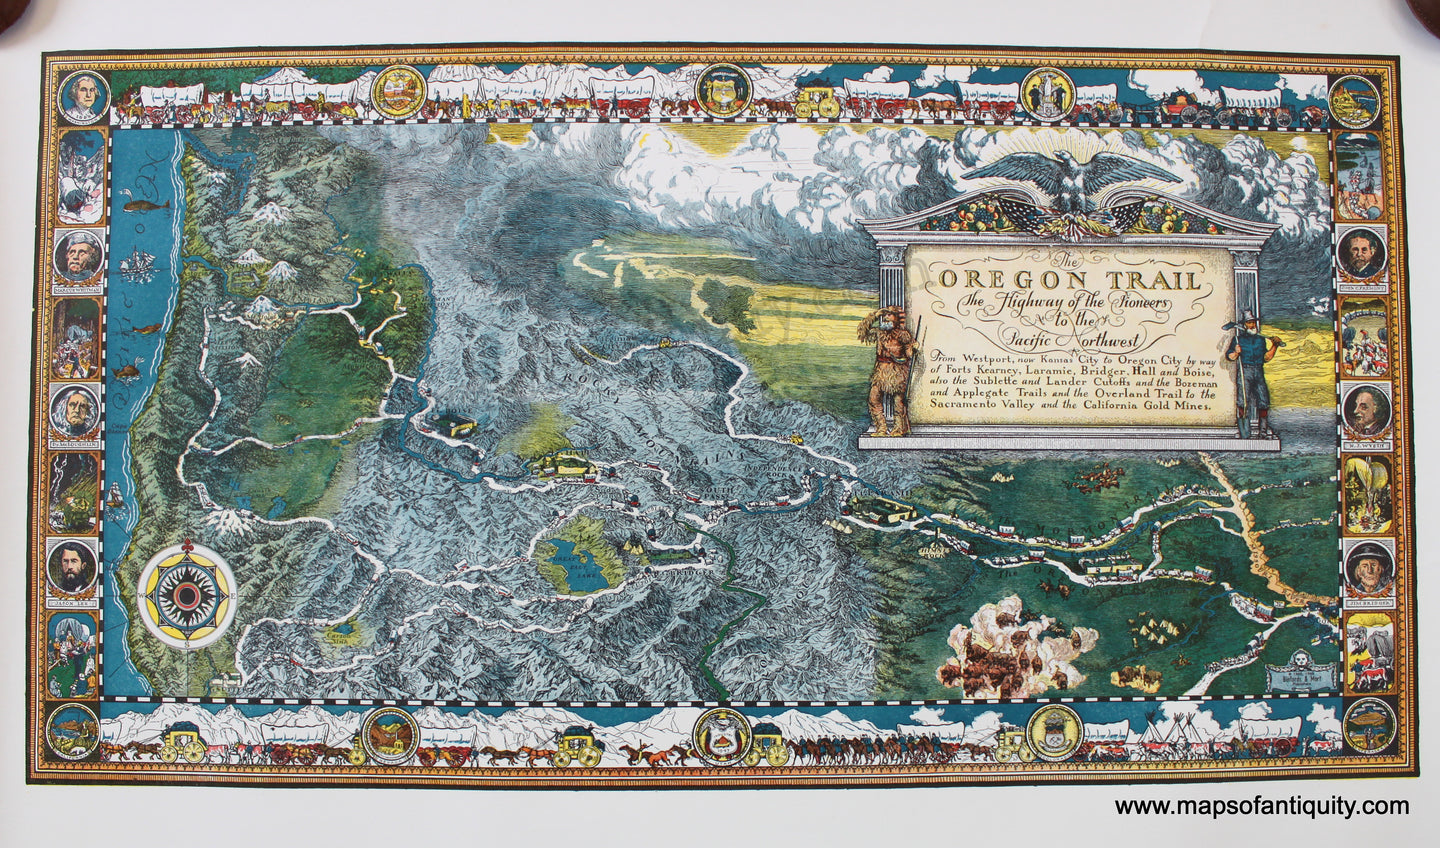 Printed-Color-Pictorial-Map-The-Oregon-Trail-The-Highway-of-the-Pioneers-to-the-Pacific-Northwest-1960/1966-McIlwraith-/-Binfords-&-Mort-West-1800s-19th-century-Maps-of-Antiquity